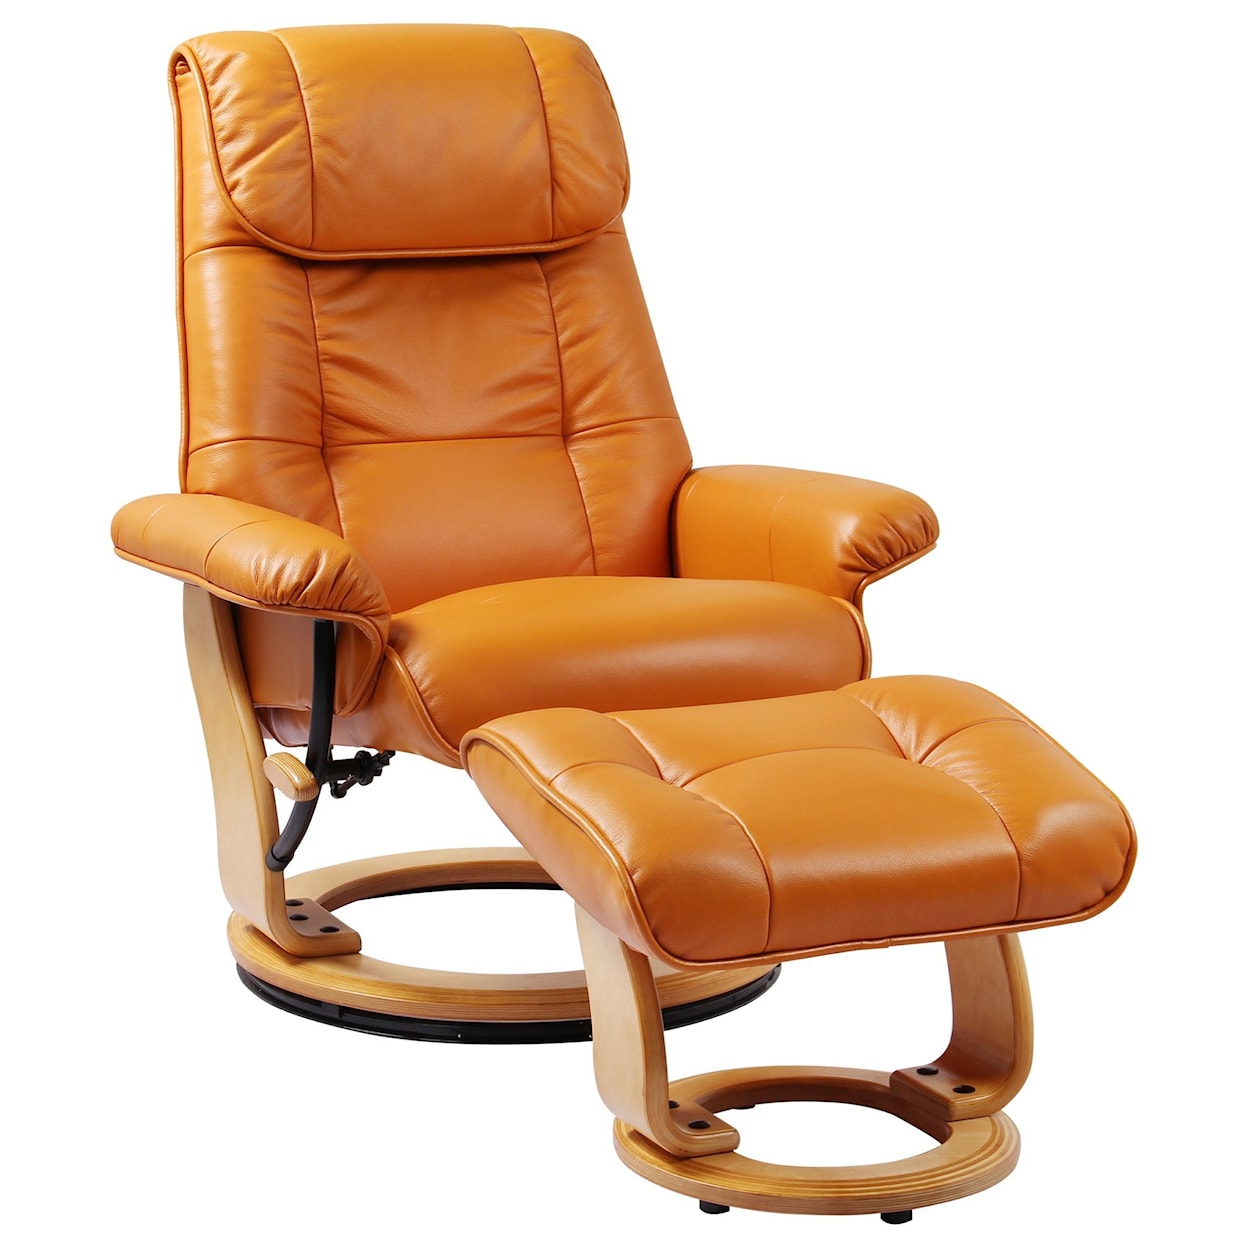 Benchmaster Ventura Reclining Chair and Ottoman w/ Light Wood